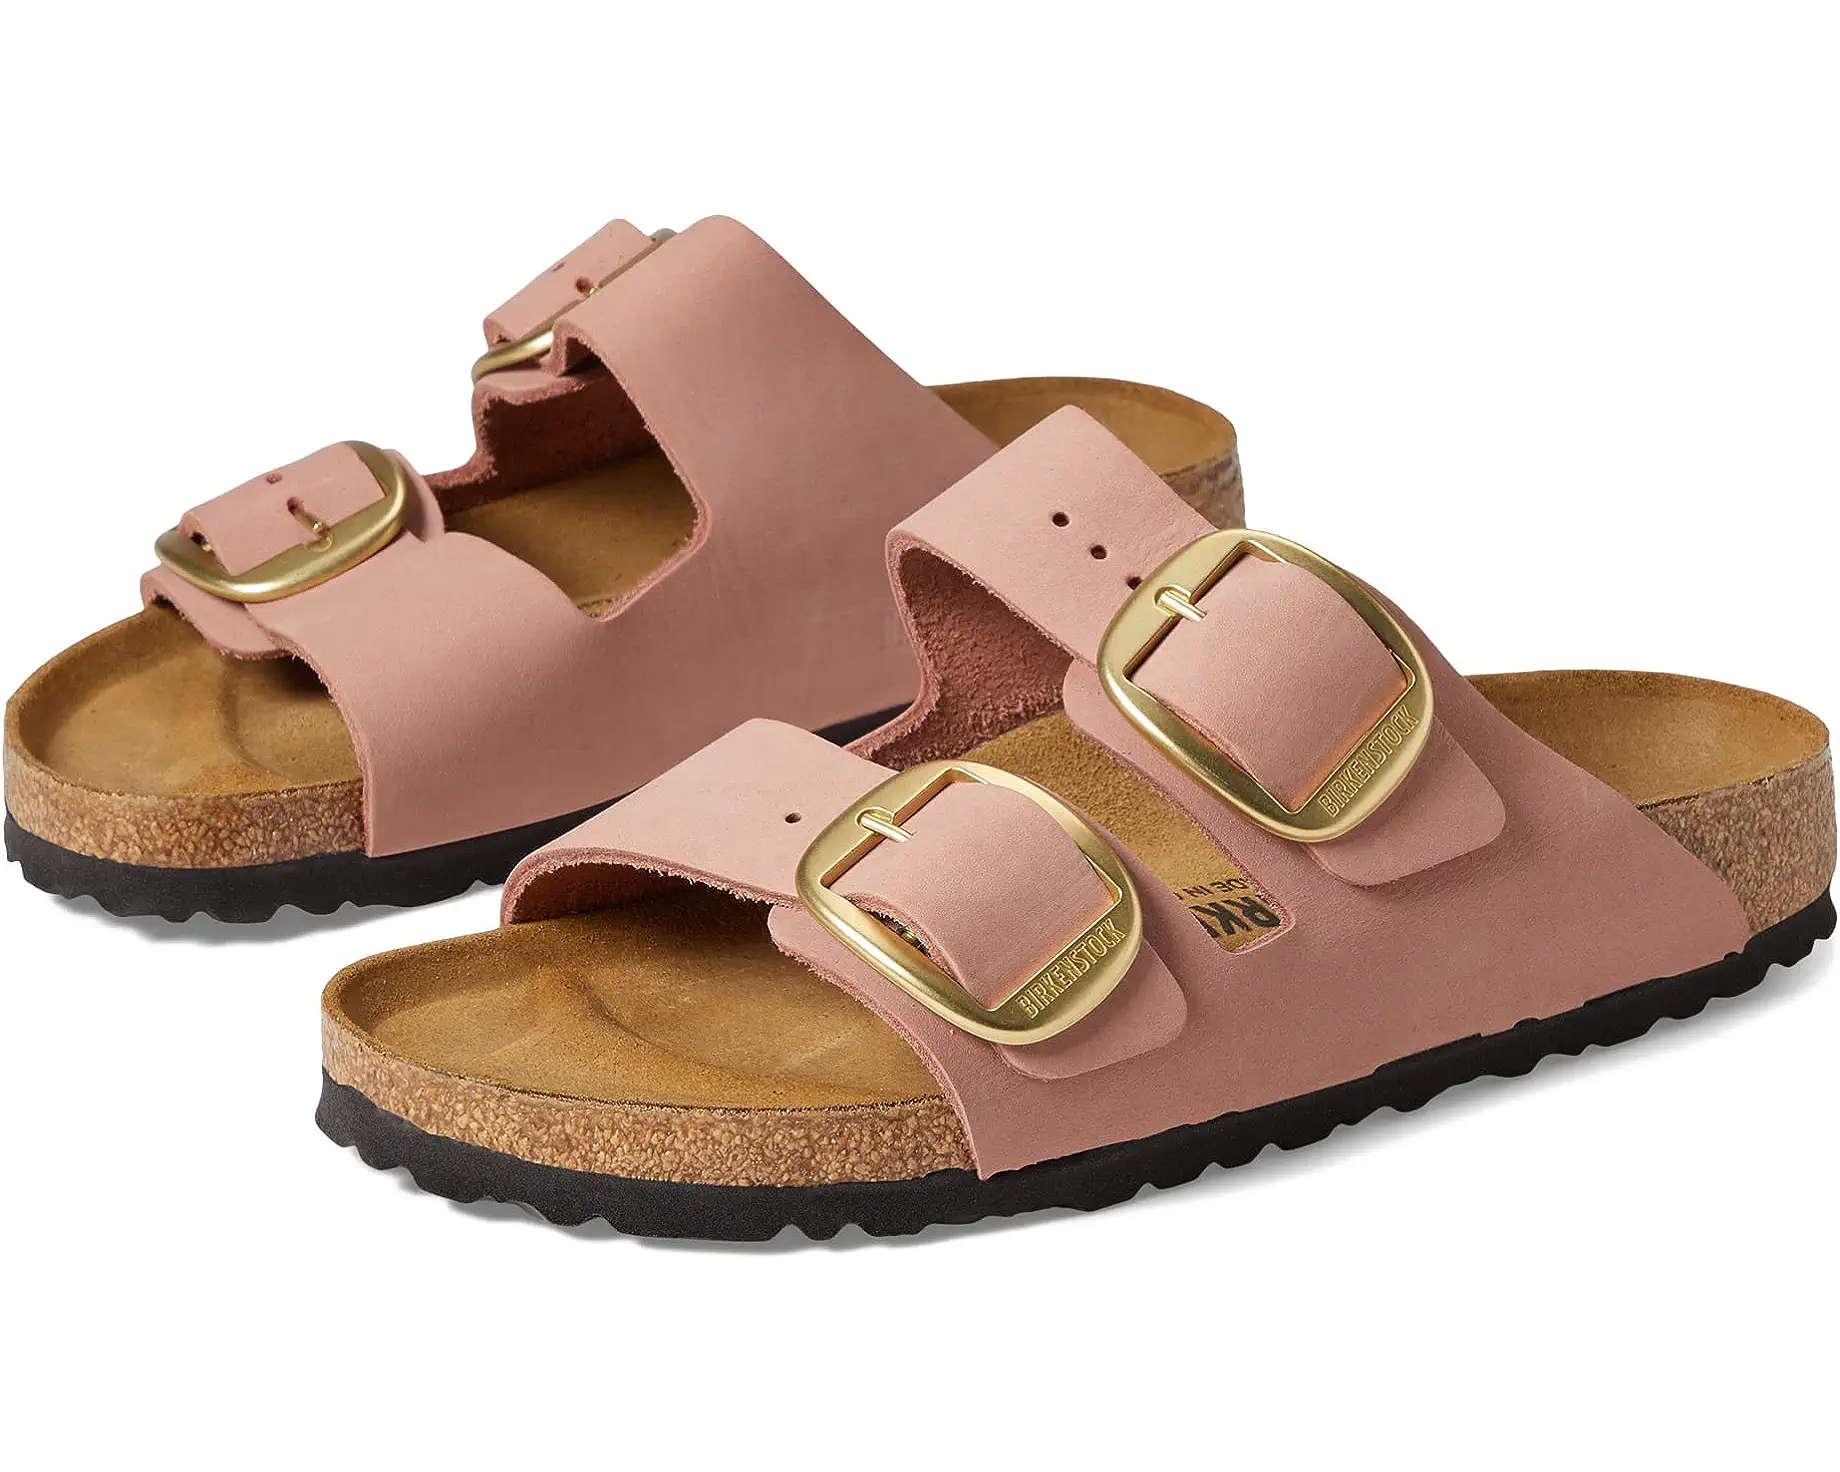 Birkenstock's Newest Style From Zappos